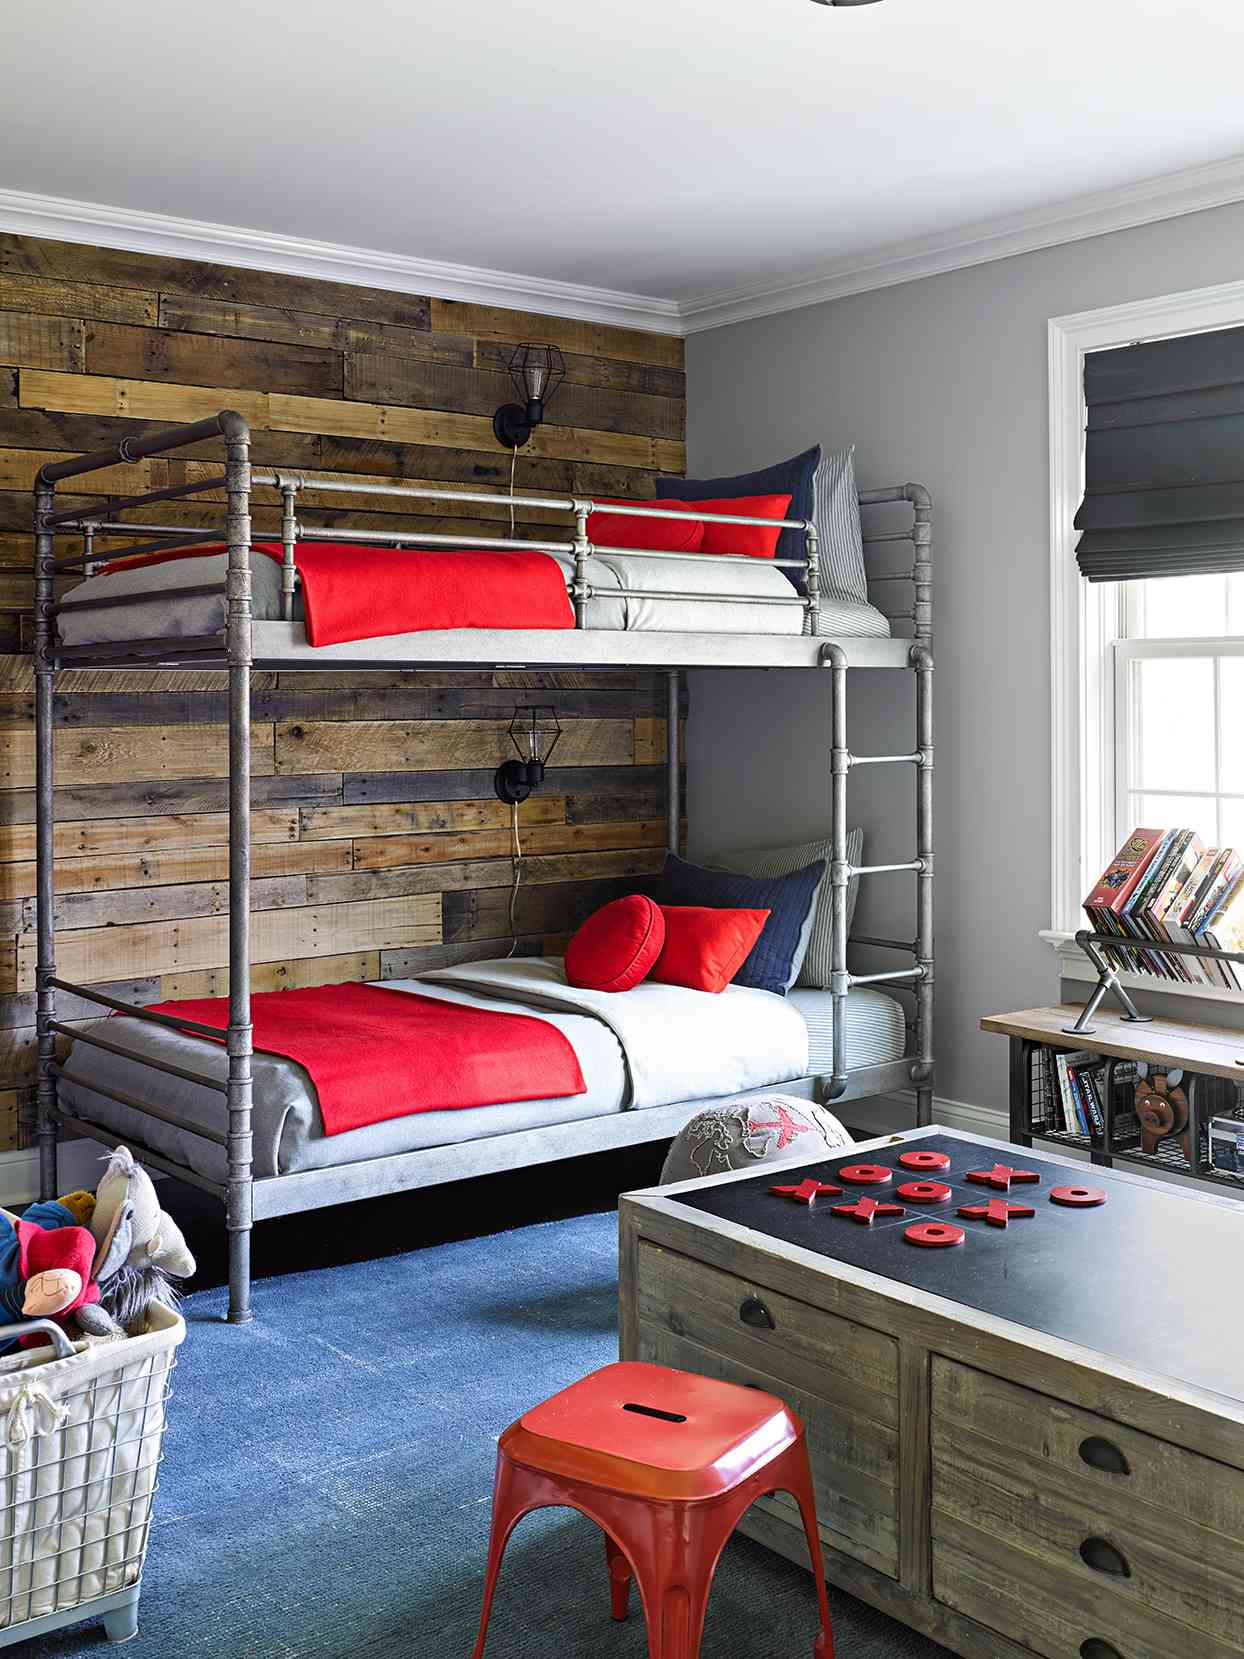 blue bedroom with bunk beds with bright red accents